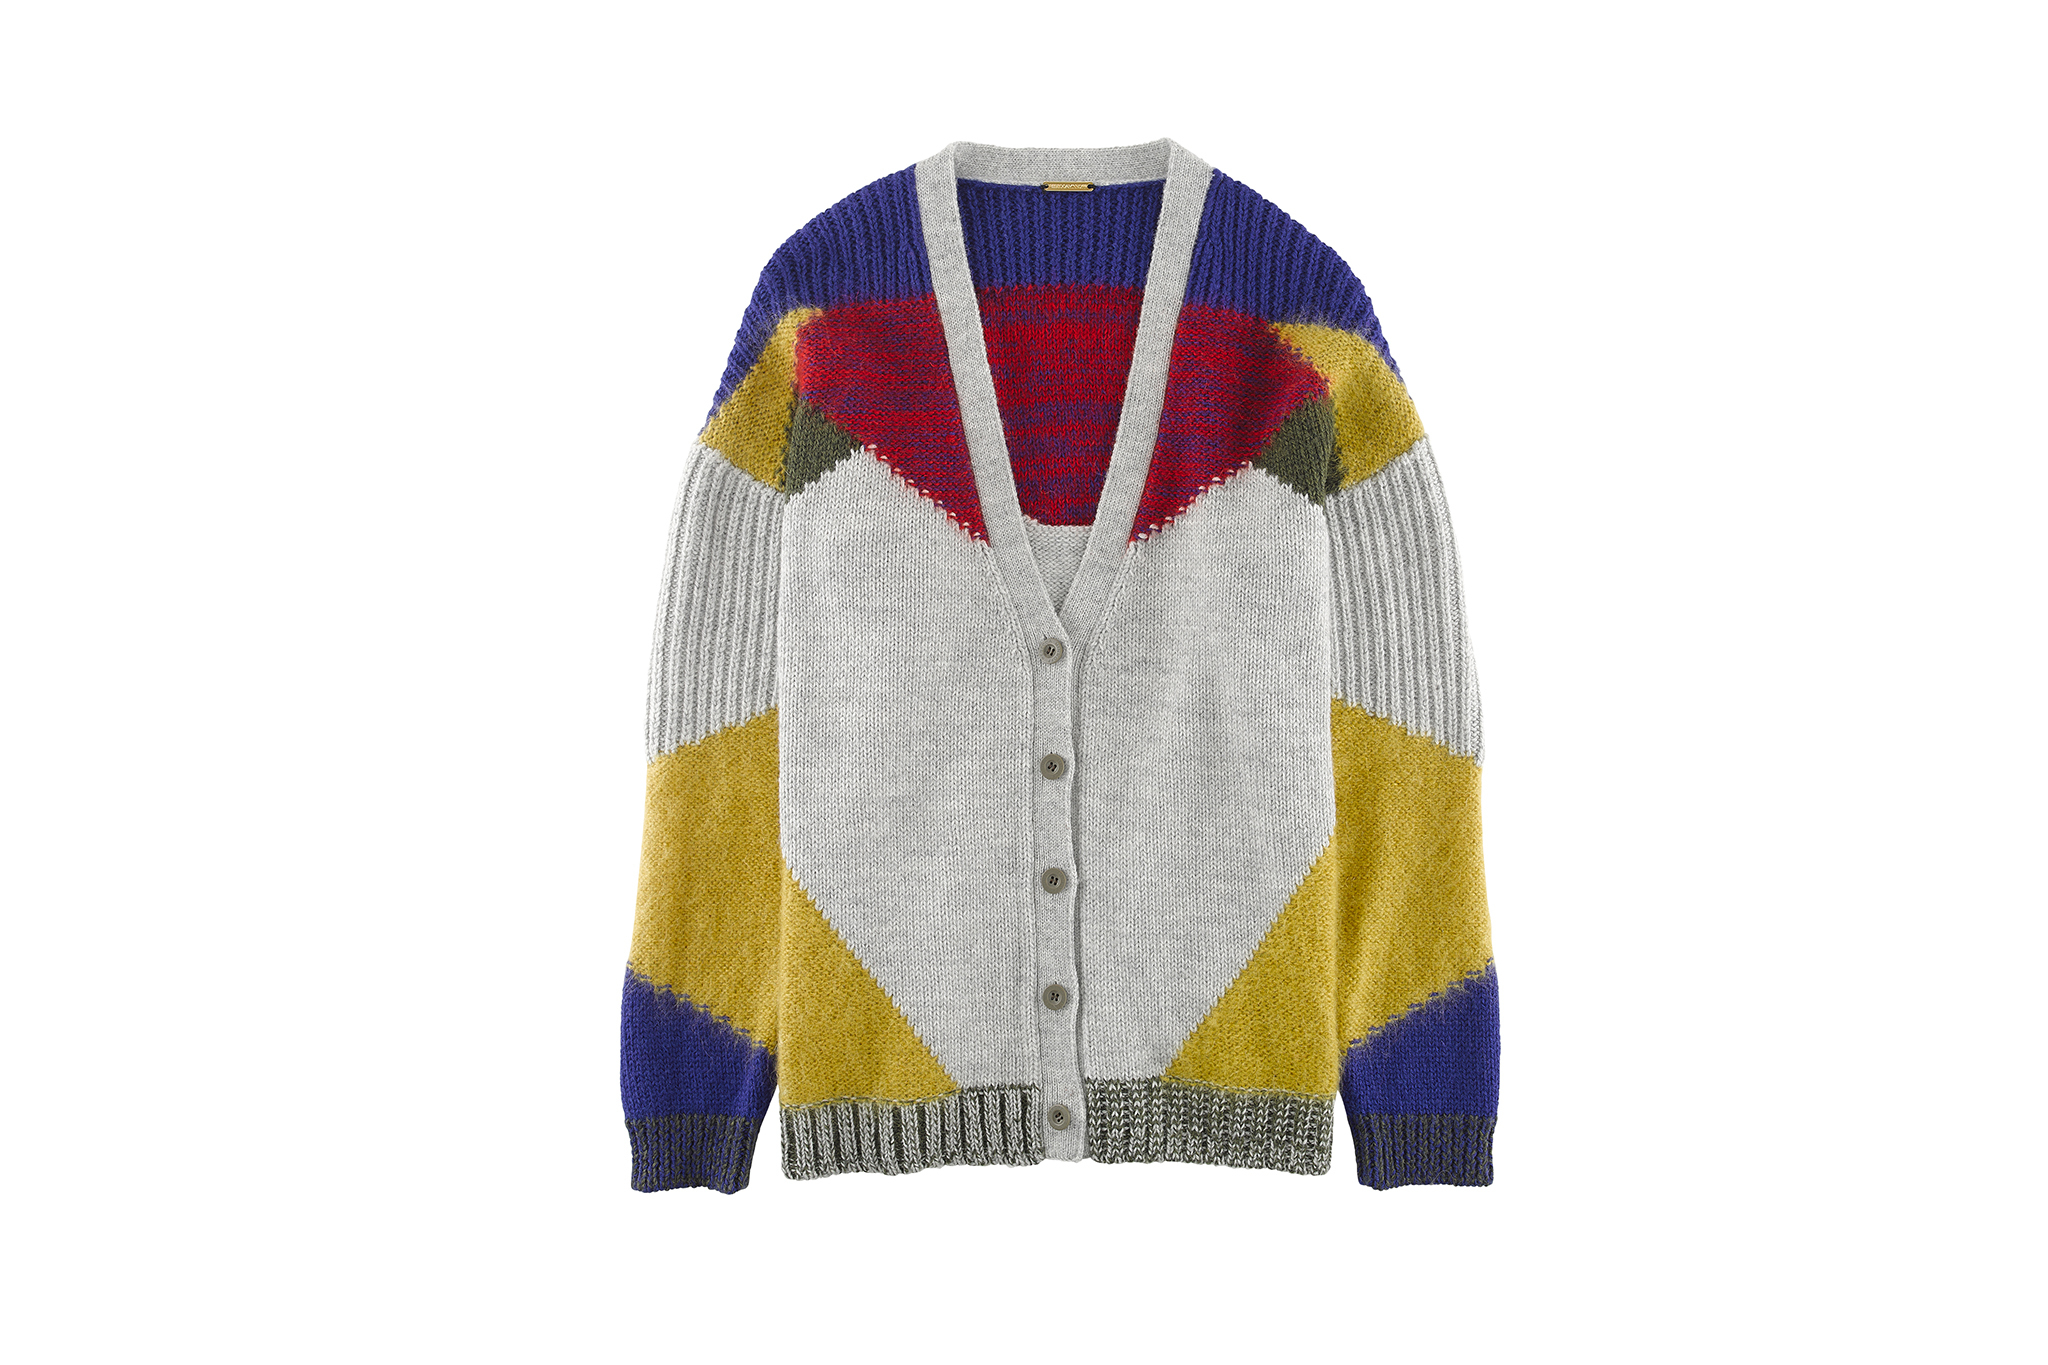 Best cardigans and sweaters for women fall 2013: Striped and colored tops